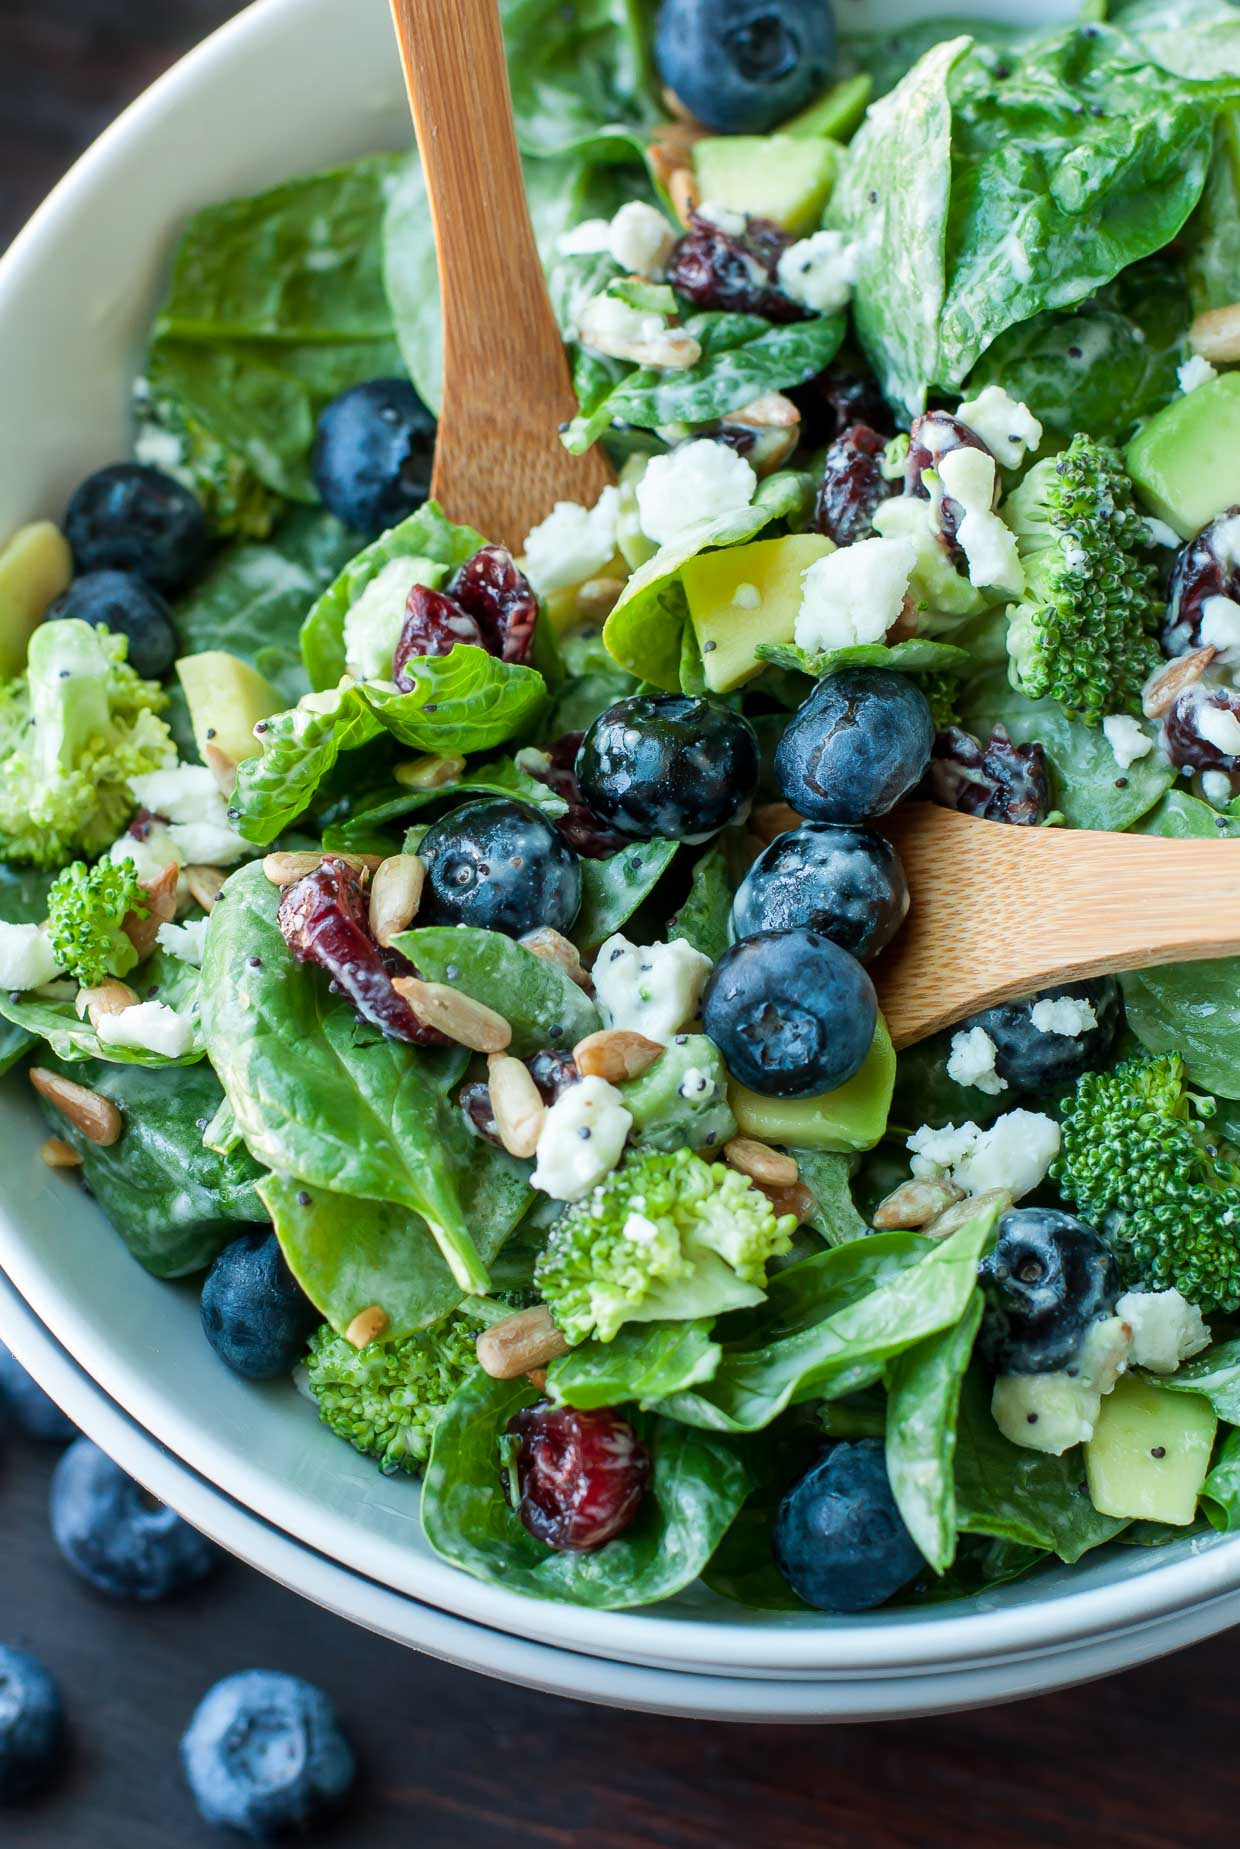 Spinach Salad Dressings Recipes
 Blueberry Broccoli Spinach Salad with Poppyseed Ranch